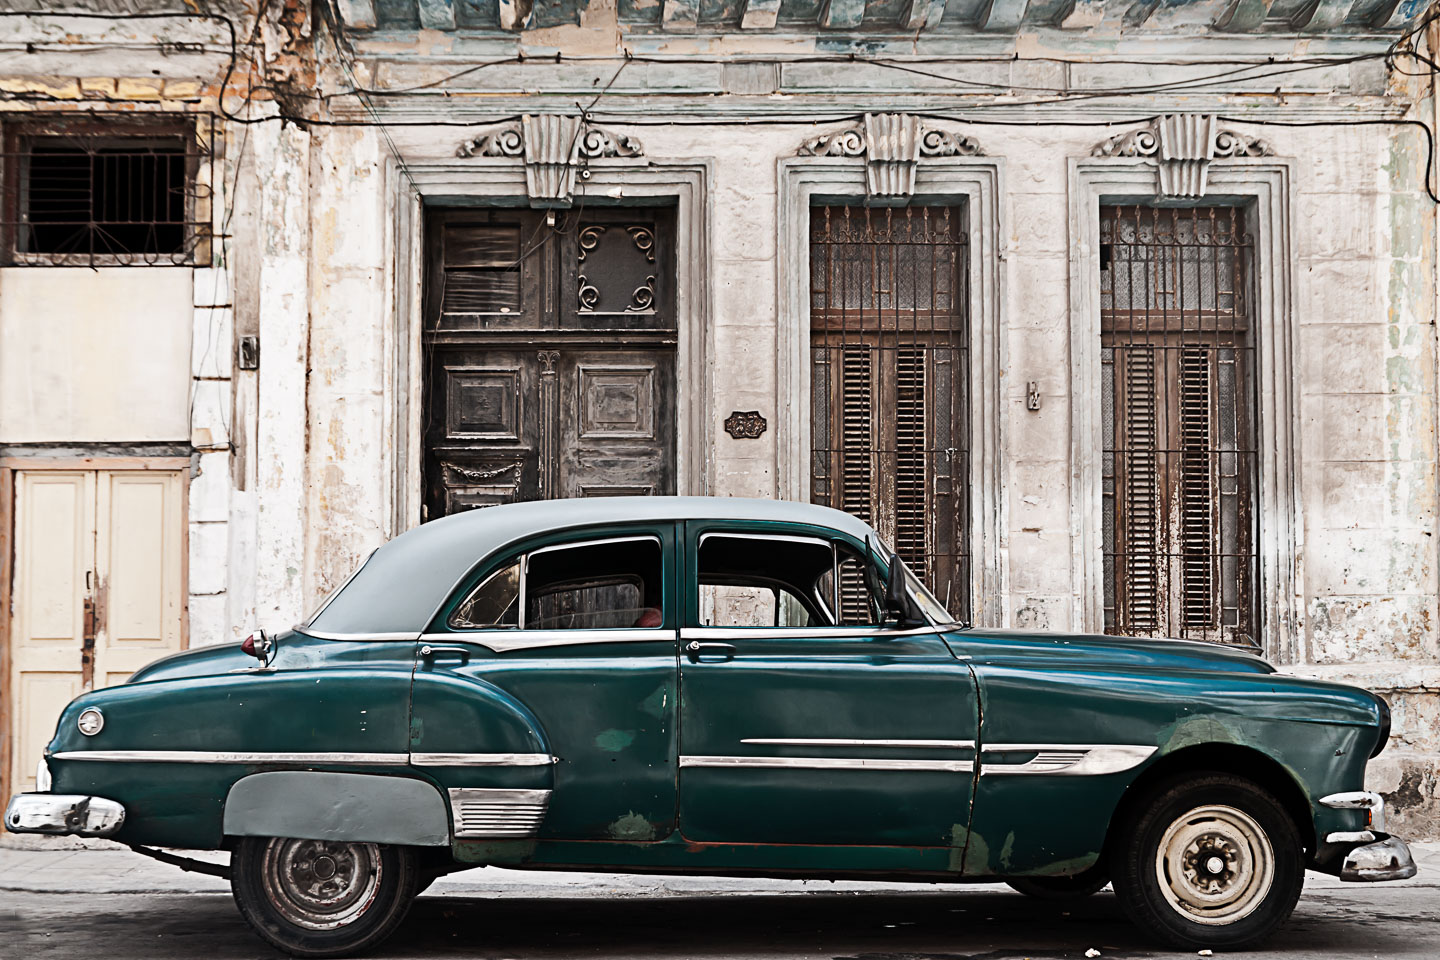 CU120028-Edit-The-beauty-of-decay-in-Centro-Habana.jpg